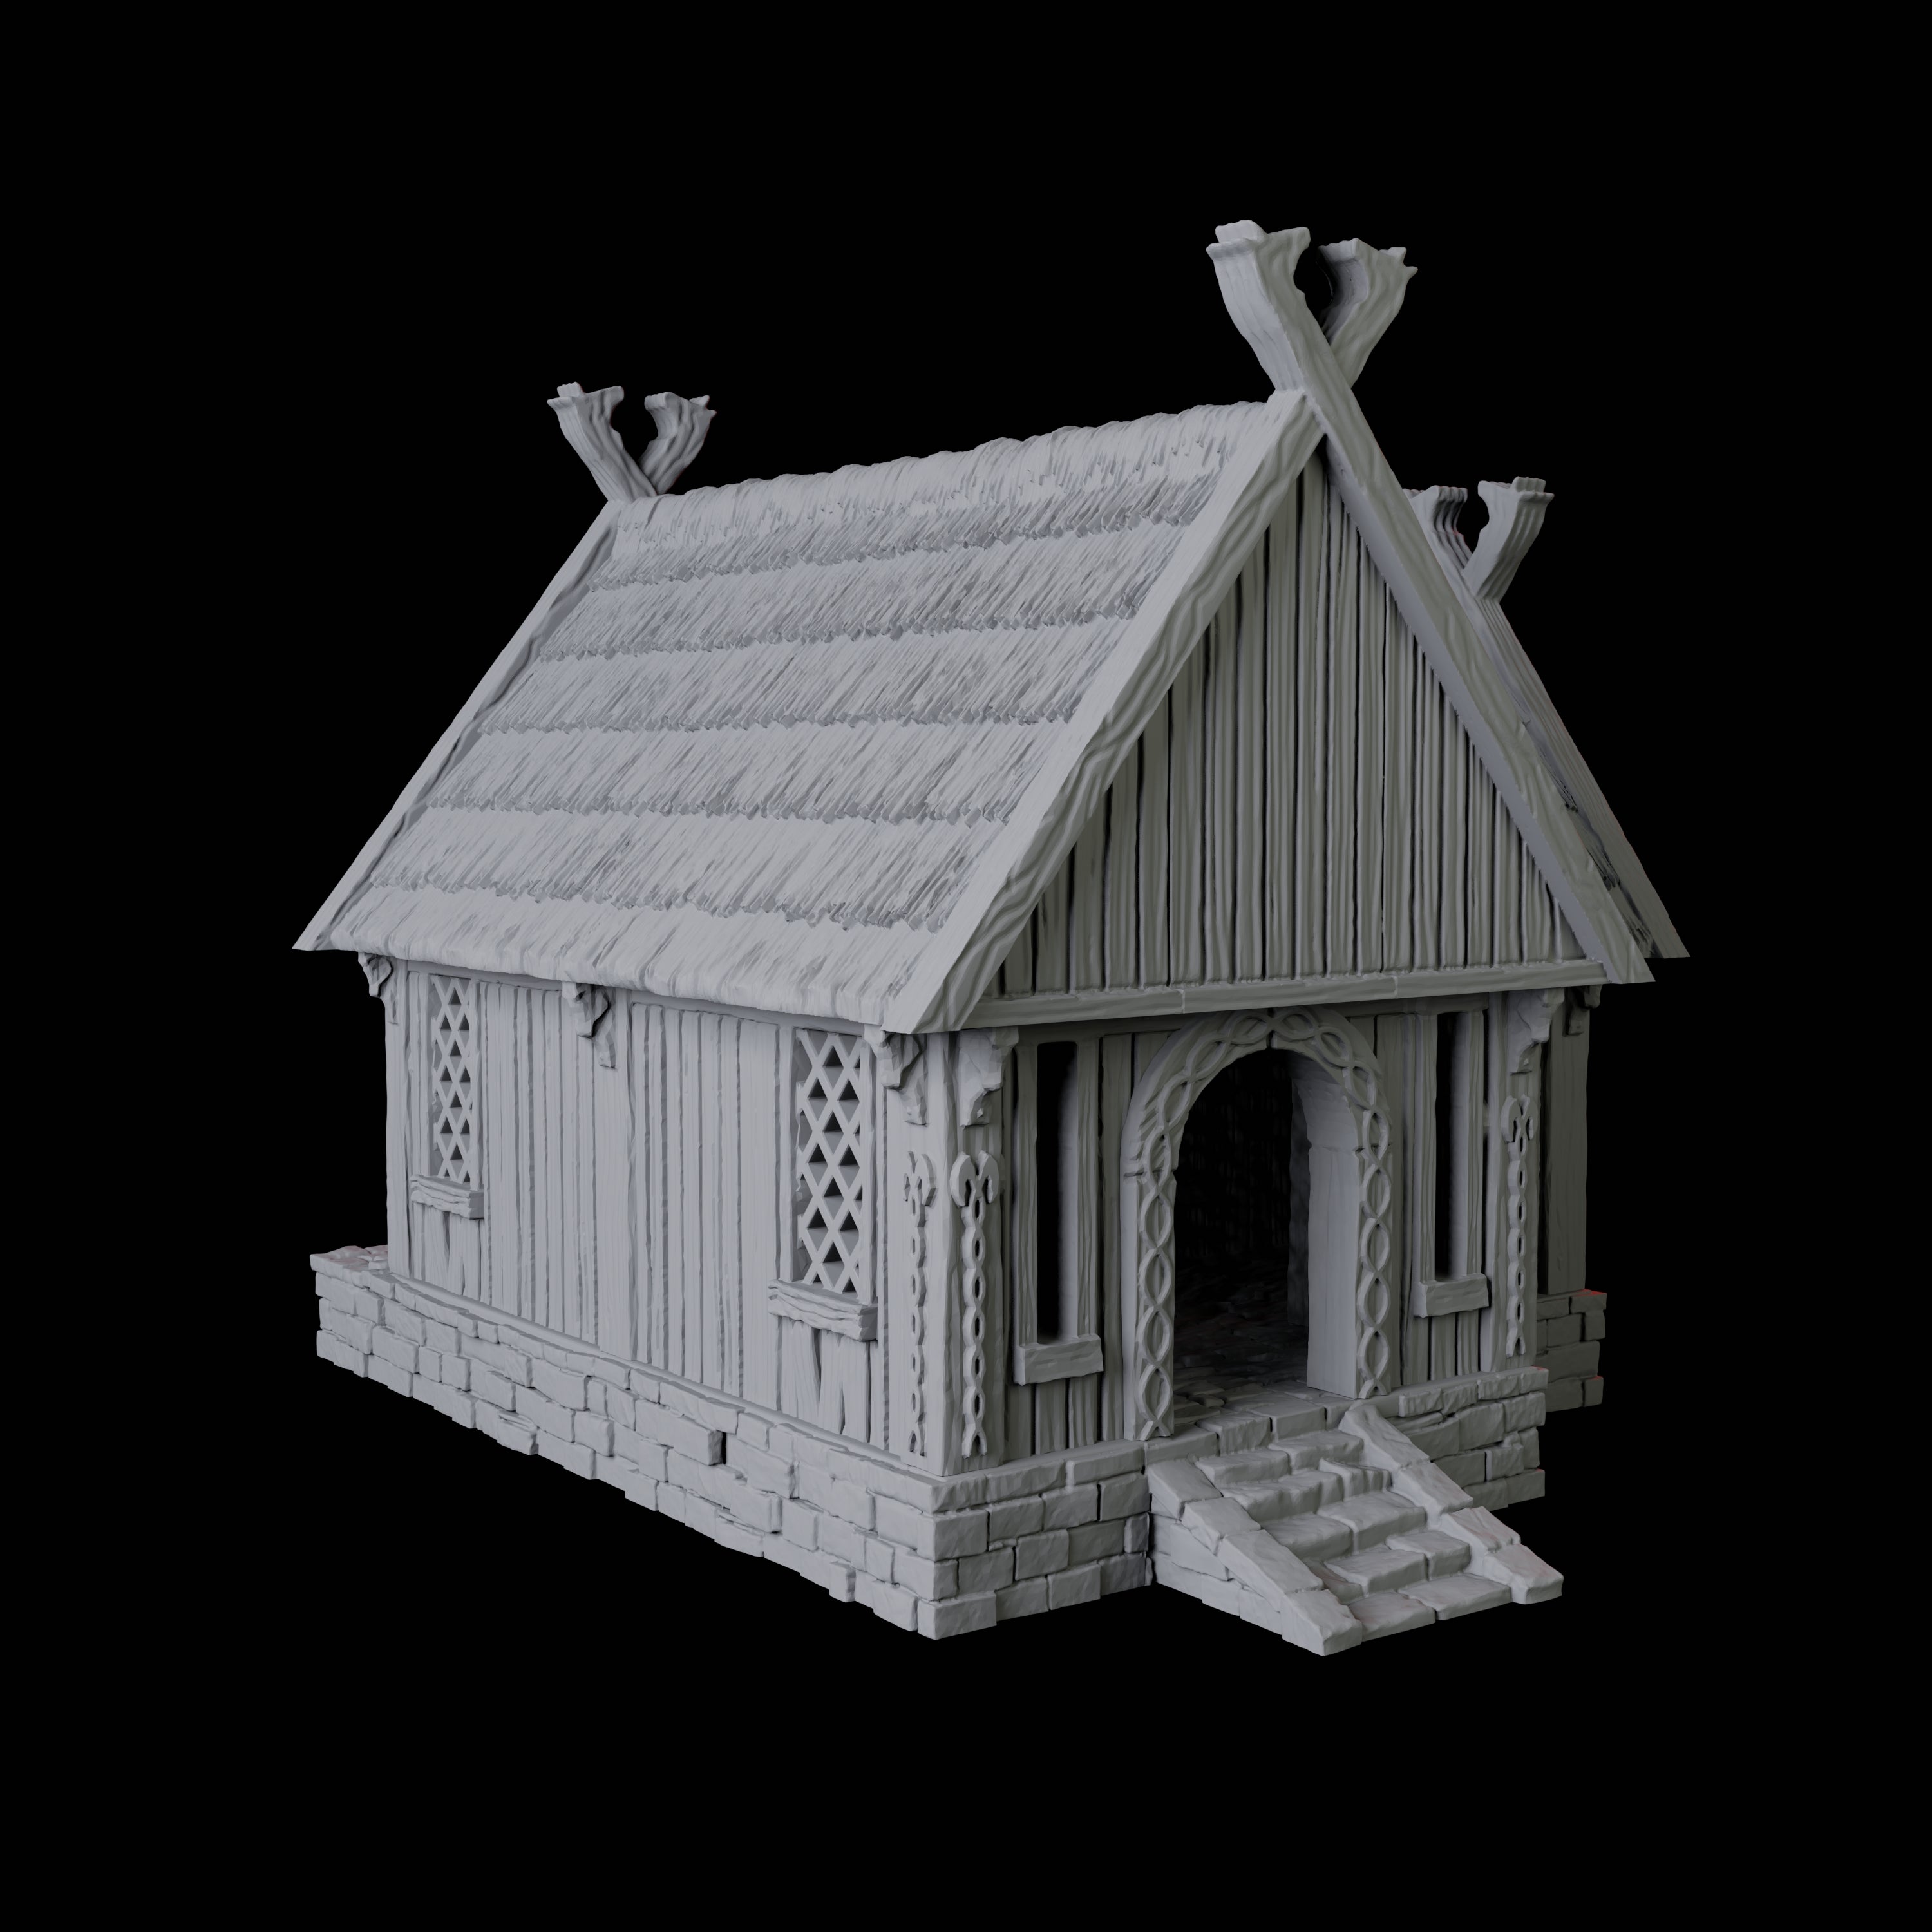 Villager's House - Saxonia Miniature for Dungeons and Dragons